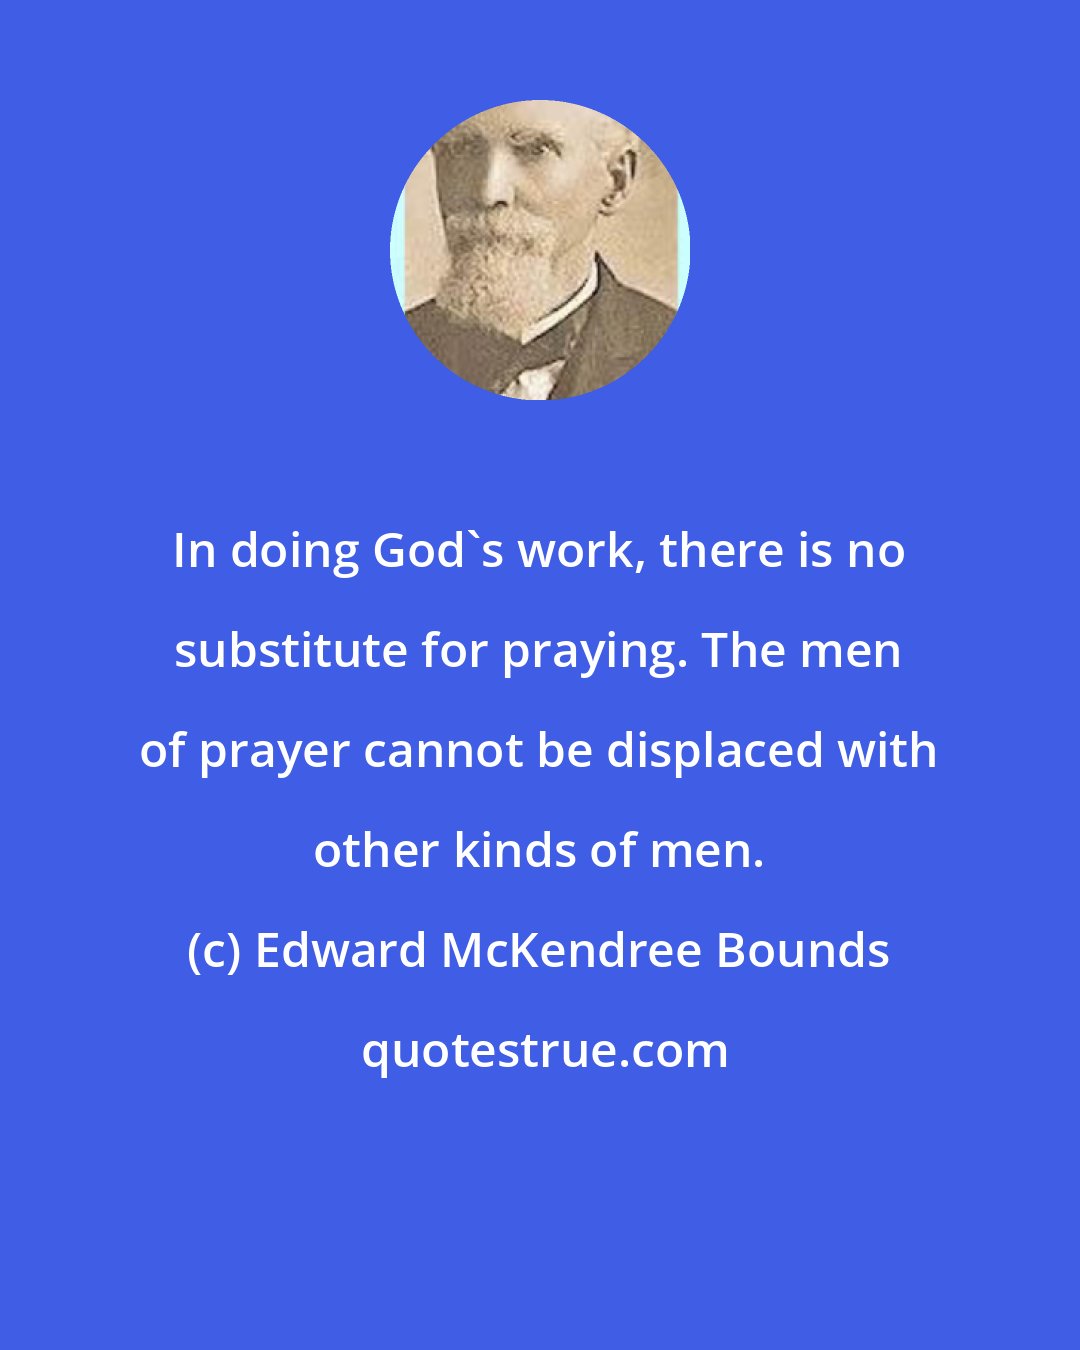 Edward McKendree Bounds: In doing God's work, there is no substitute for praying. The men of prayer cannot be displaced with other kinds of men.